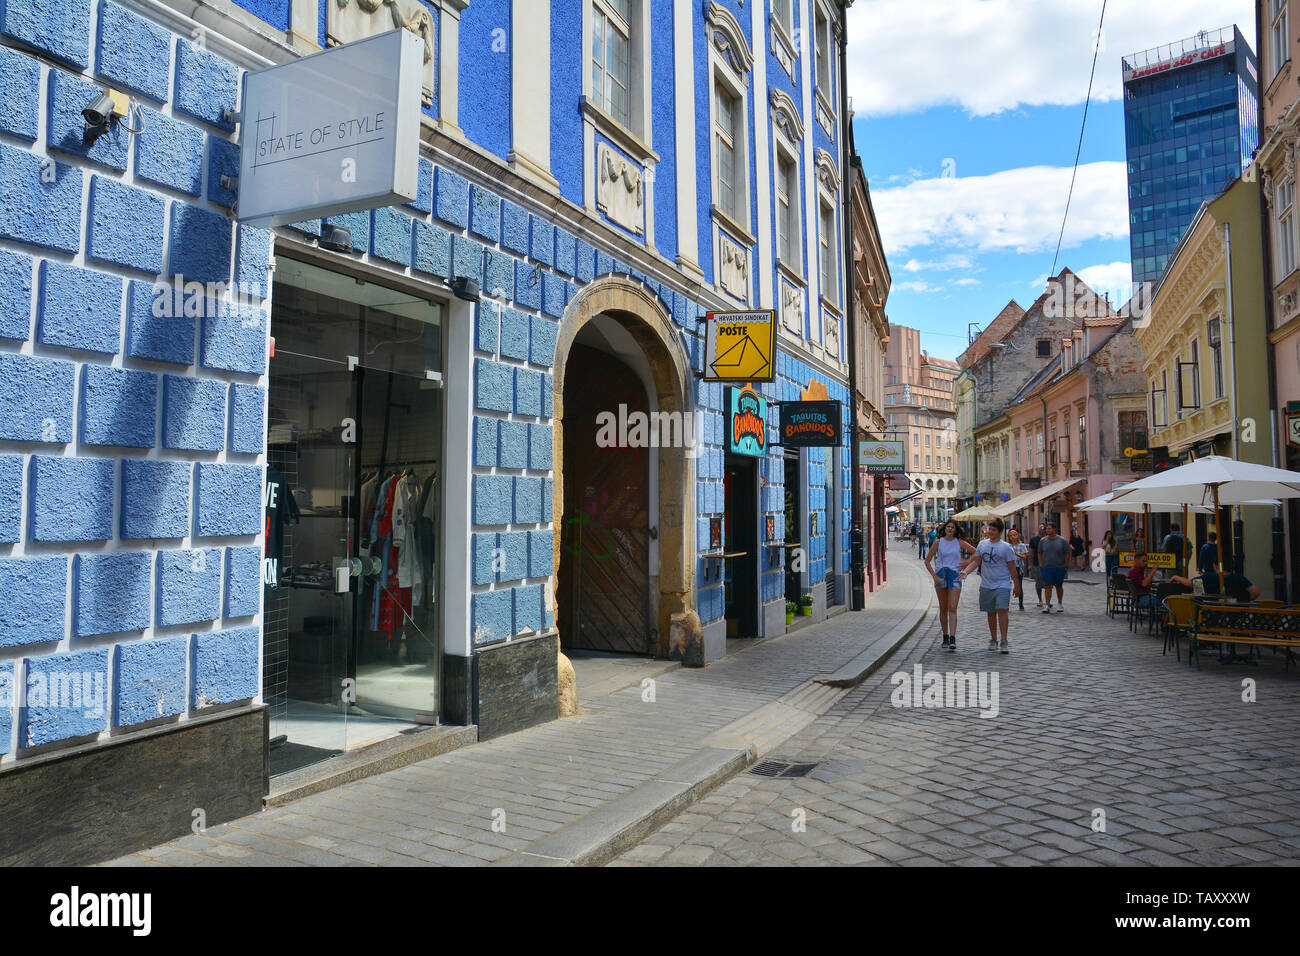 ZAGREB, CROATIA - JULY 15, 2017. Radiceva Street view in Old town of Zagreb with Zagreb 360° cafe and observation deck, Croatia Stock Photo